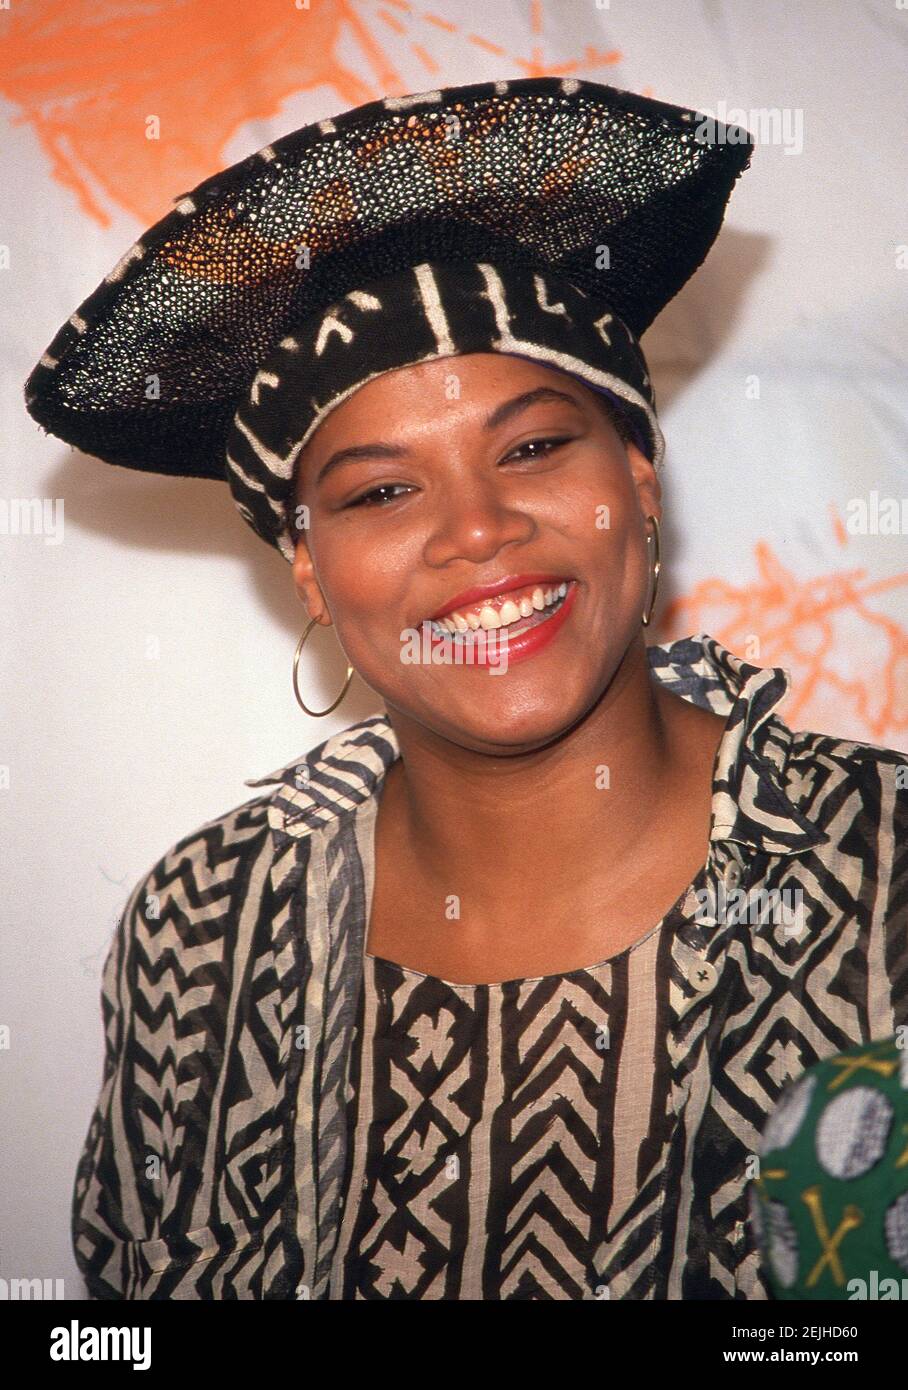 Queen Latifah at the 1990 MTV Music Video Awards the Universal Amphitheatre in Los Angeles, California on September 6, 1990  Credit: Ralph Dominguez/MediaPunch Stock Photo